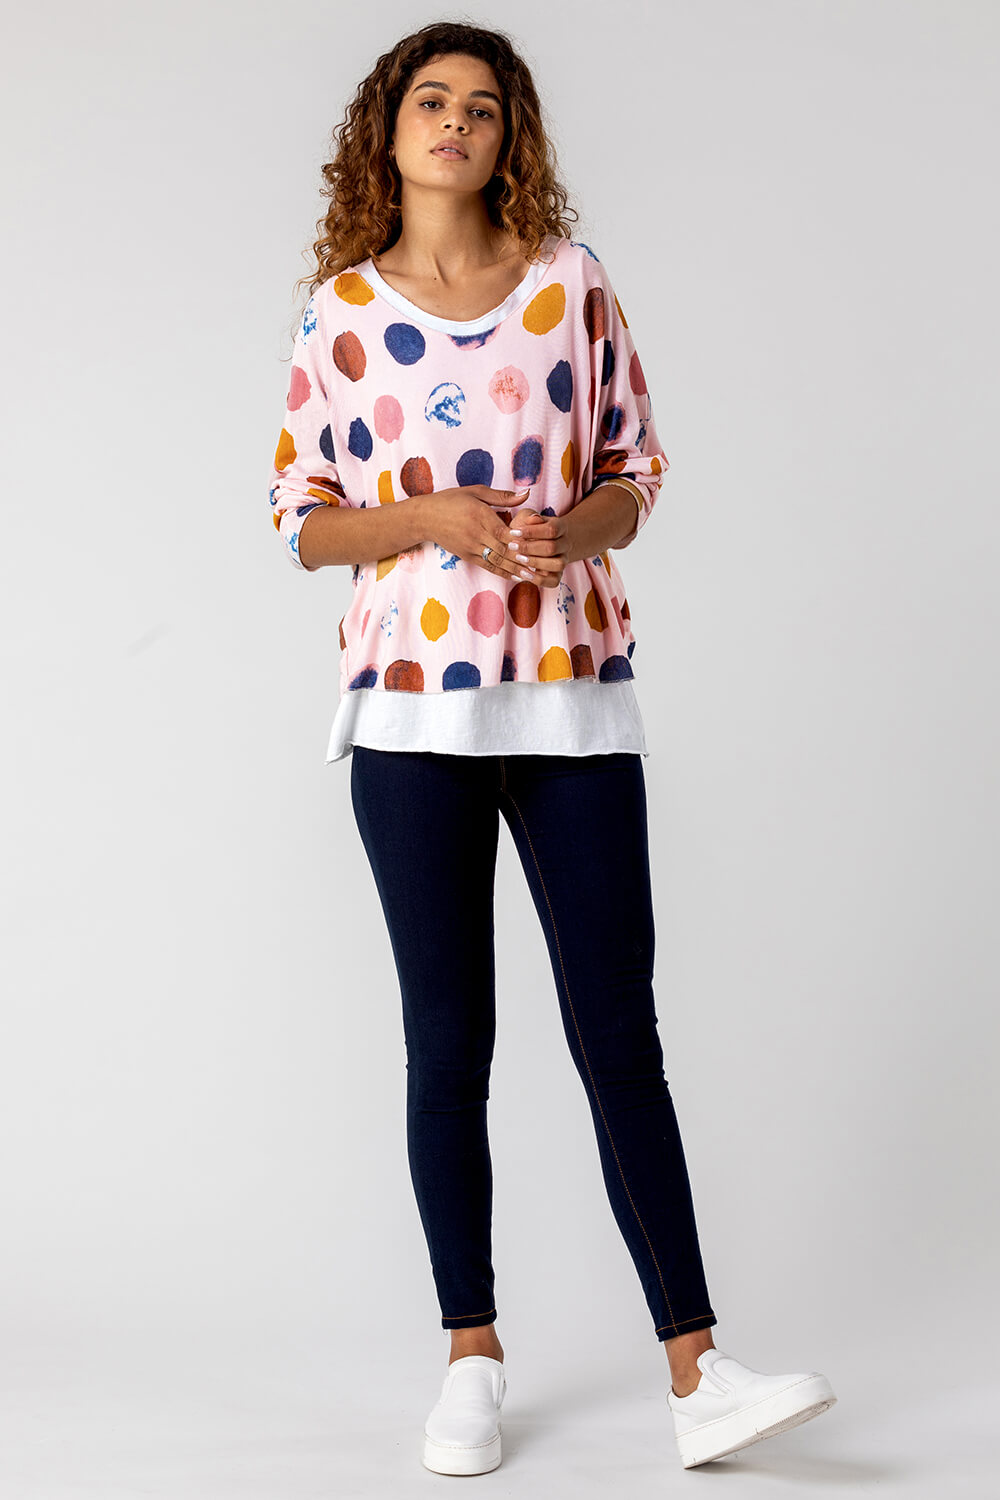 PINK Spot Print Double Layer Top, Image 3 of 4